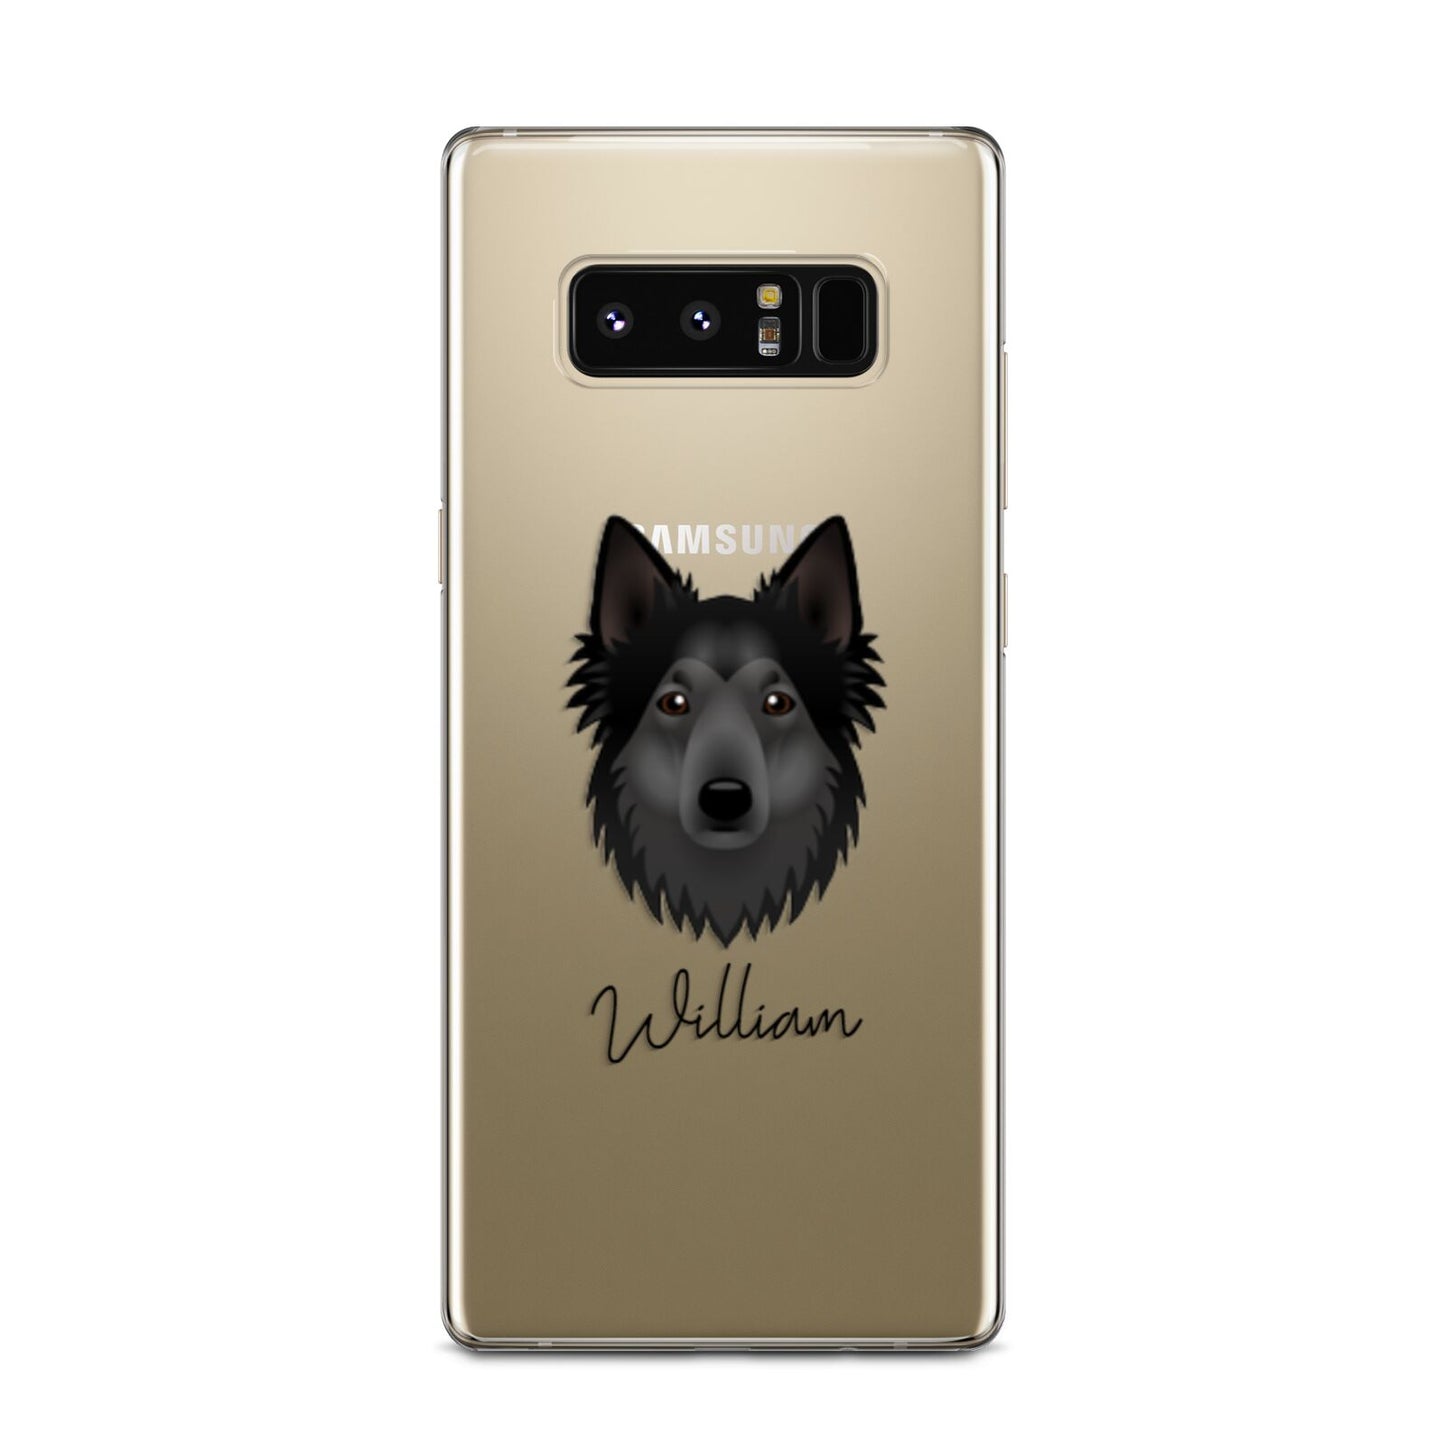 Shollie Personalised Samsung Galaxy Note 8 Case